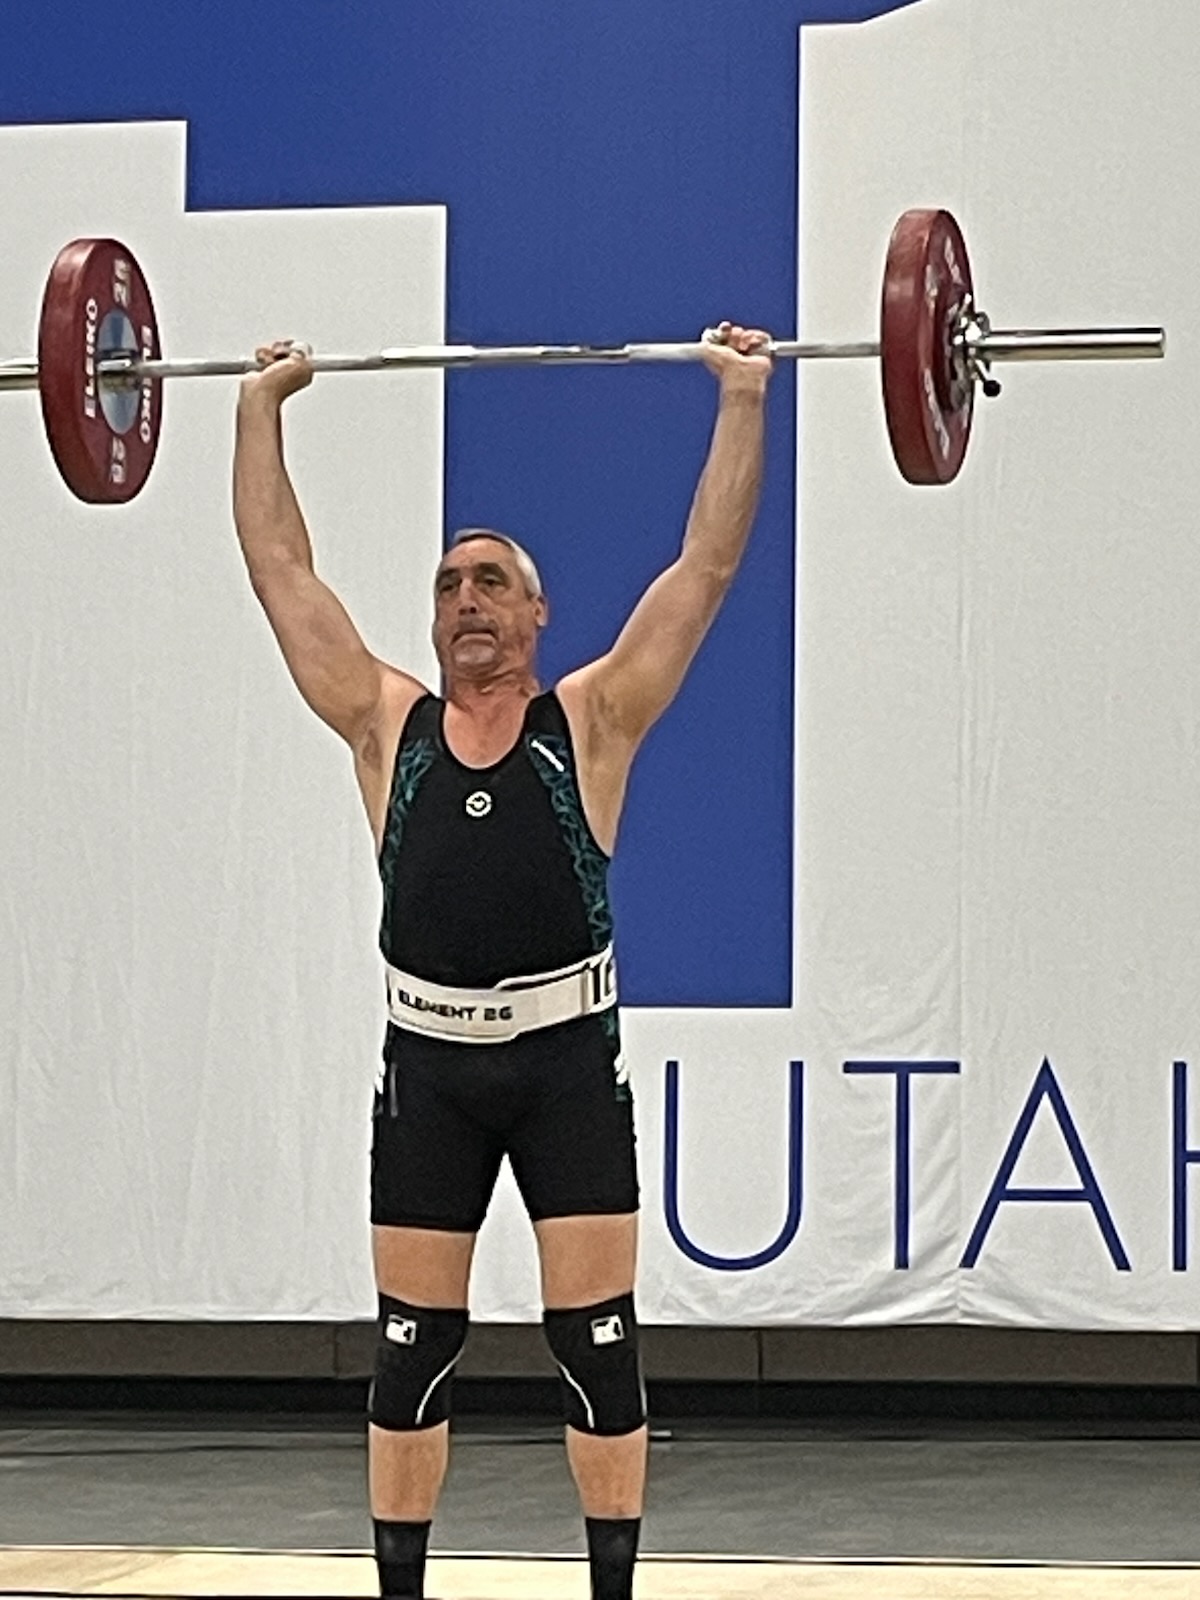 A man lifts a barbell over his head